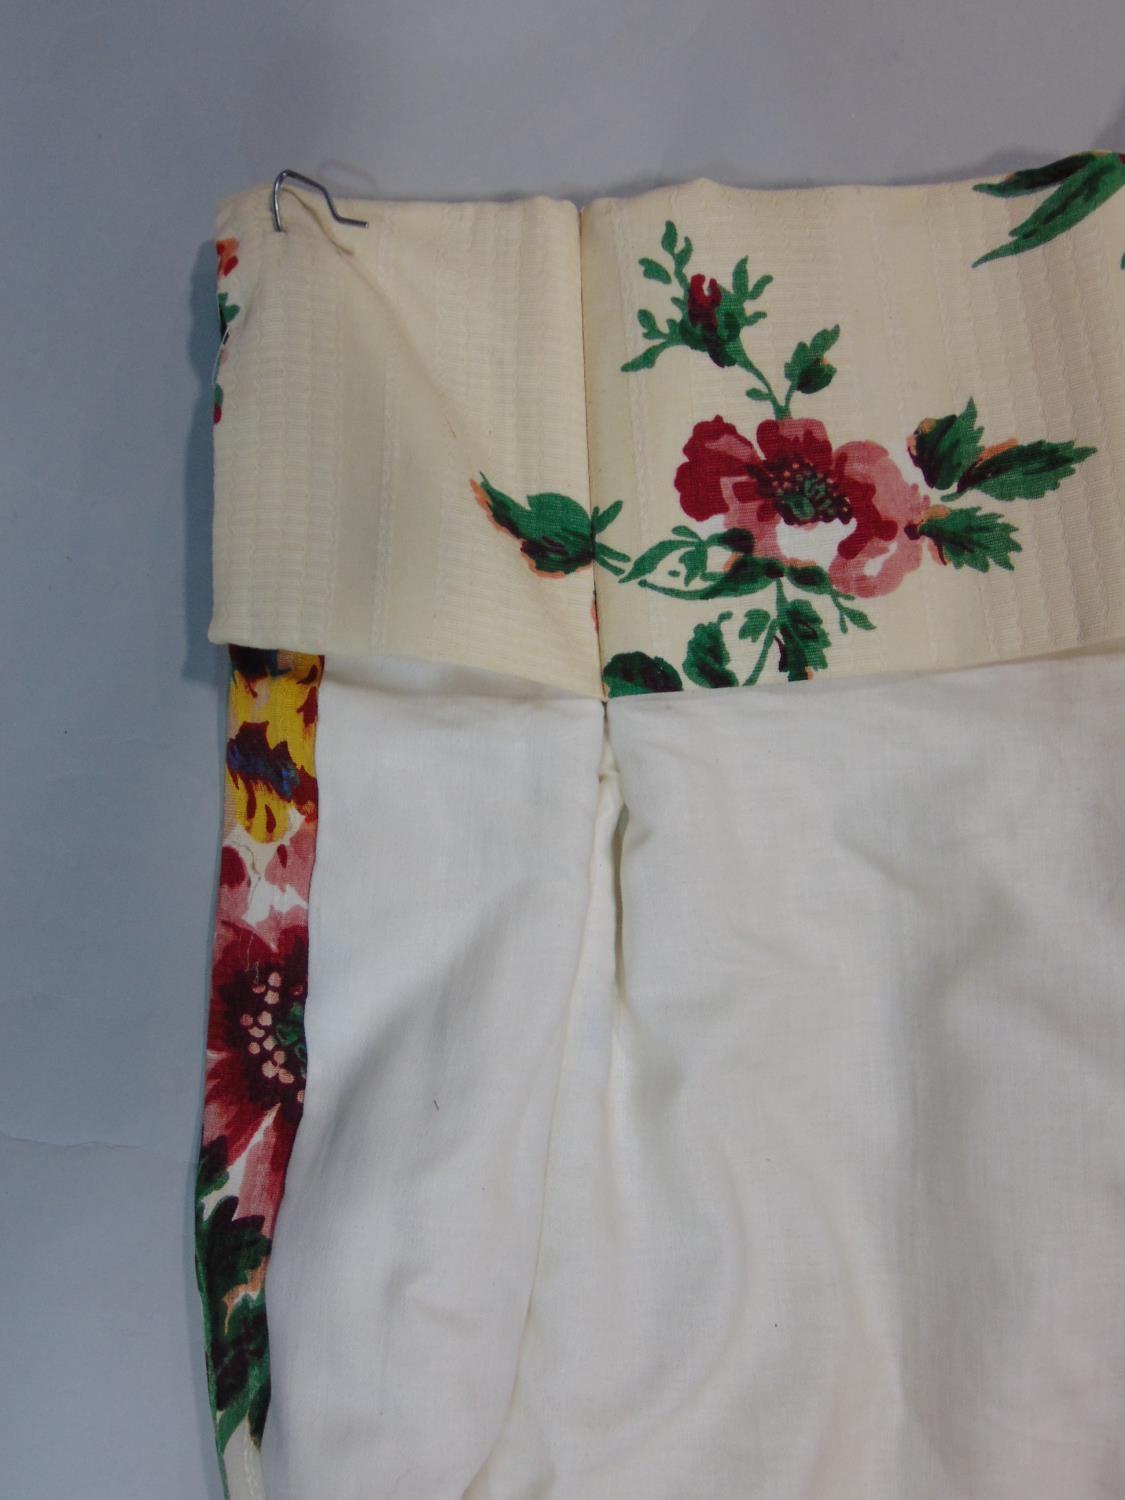 1 pair good quality curtains in floral print with triple pleat heading and blanket lining. Length - Image 3 of 3